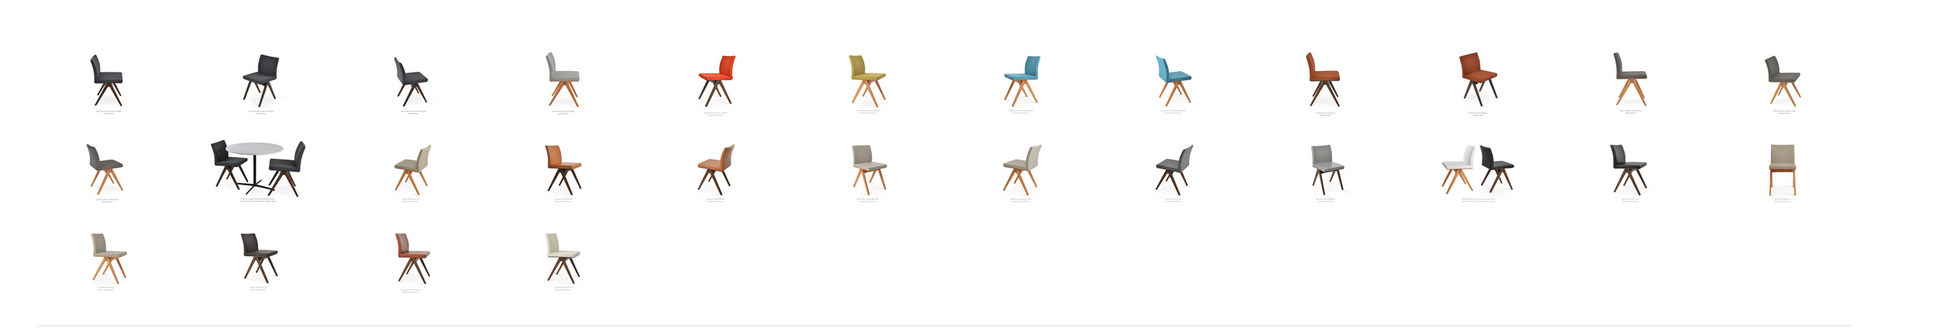 Aria Fino Chair - Refined Design for Modern Living | All Colors